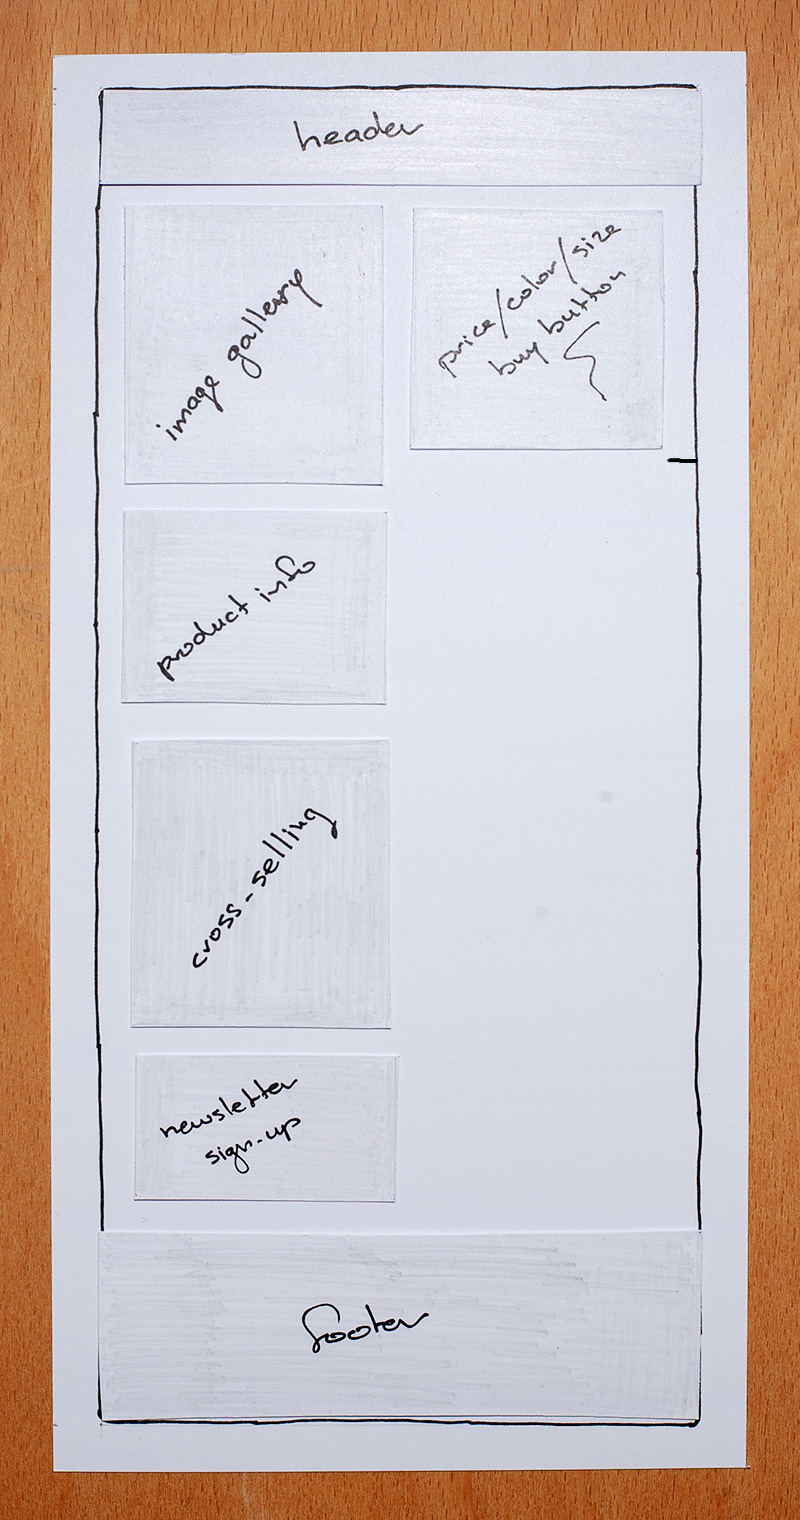 Page wireframe step 1 - Hierarchy